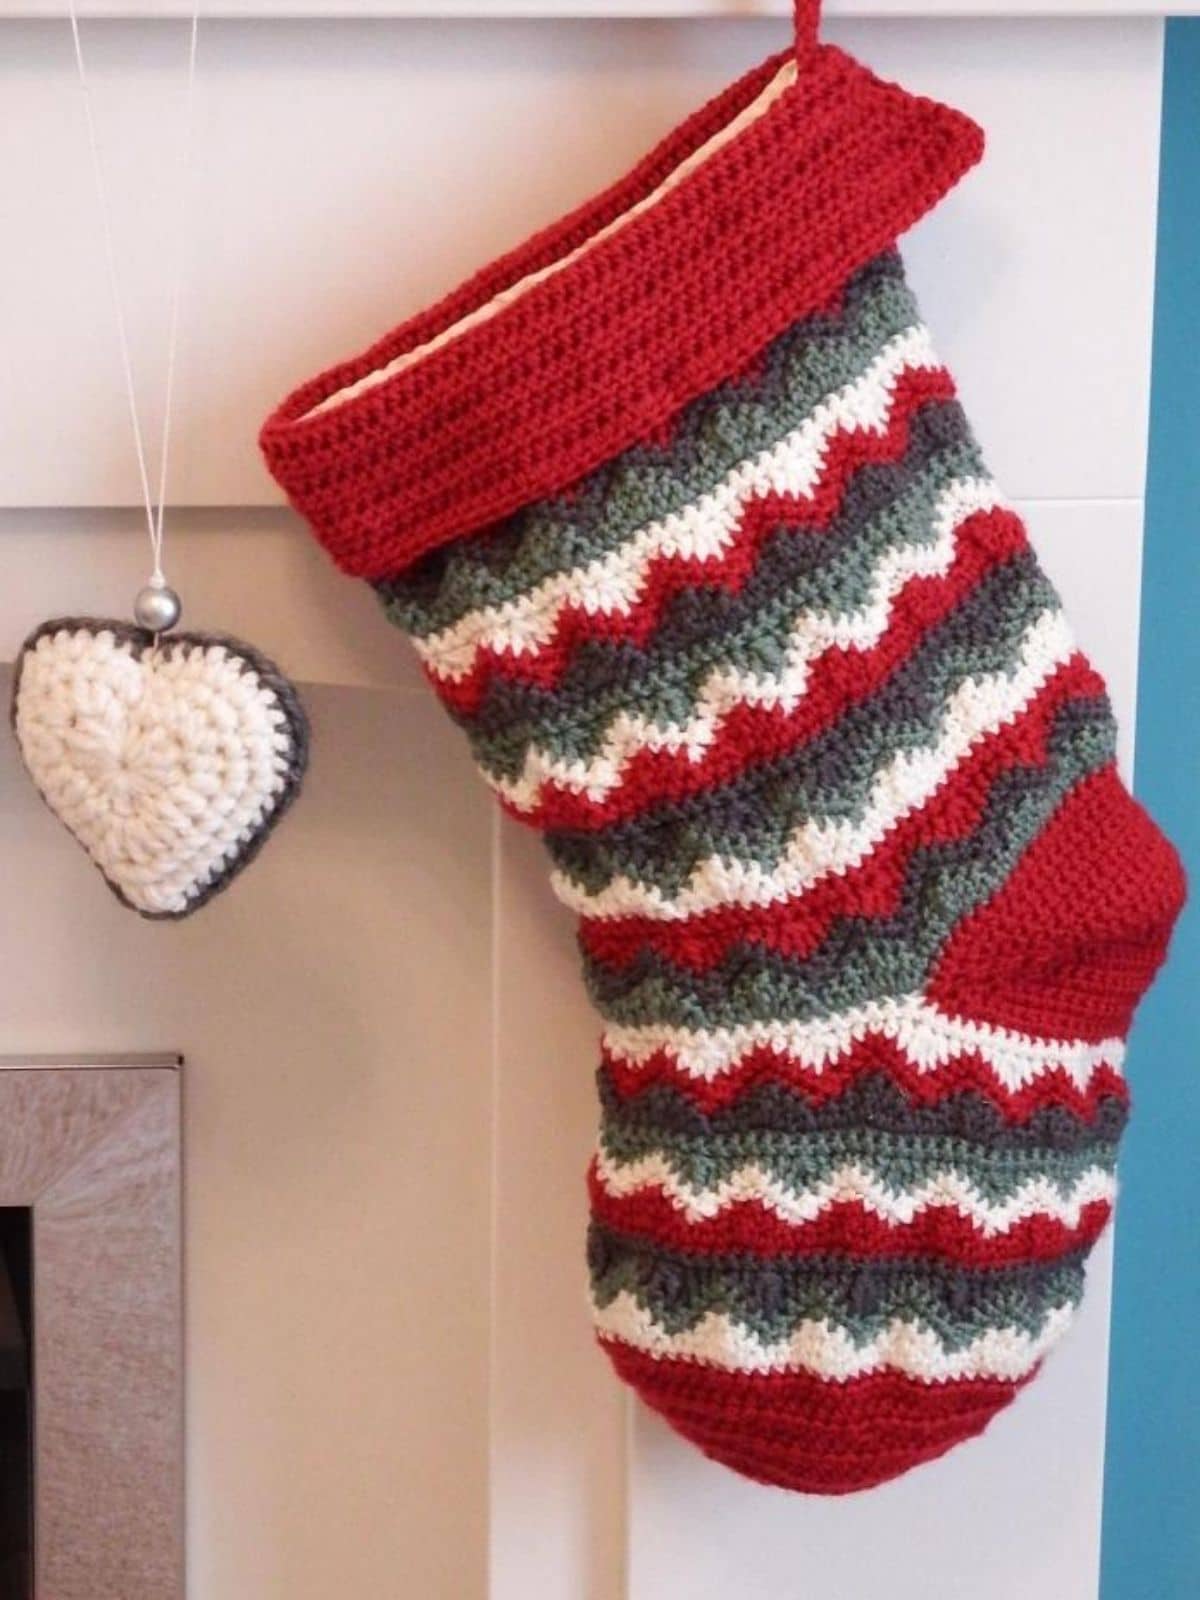 Zig-zag red white and green stocking hanging from a mantle next to a white heart decoration.